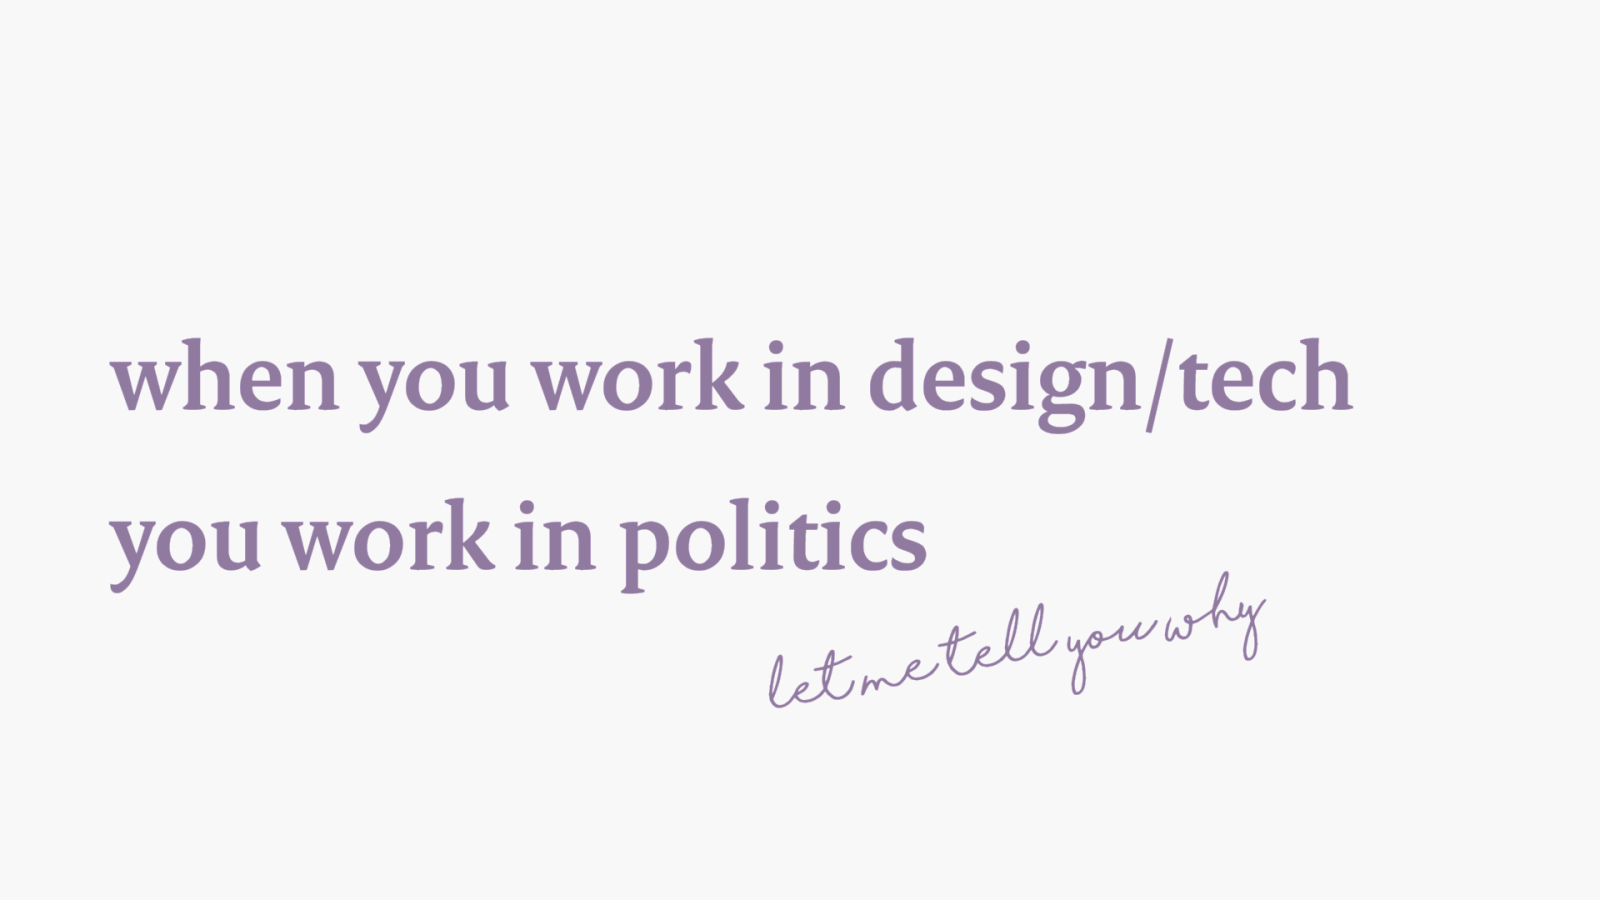 When you work in design or tech, you work in politics